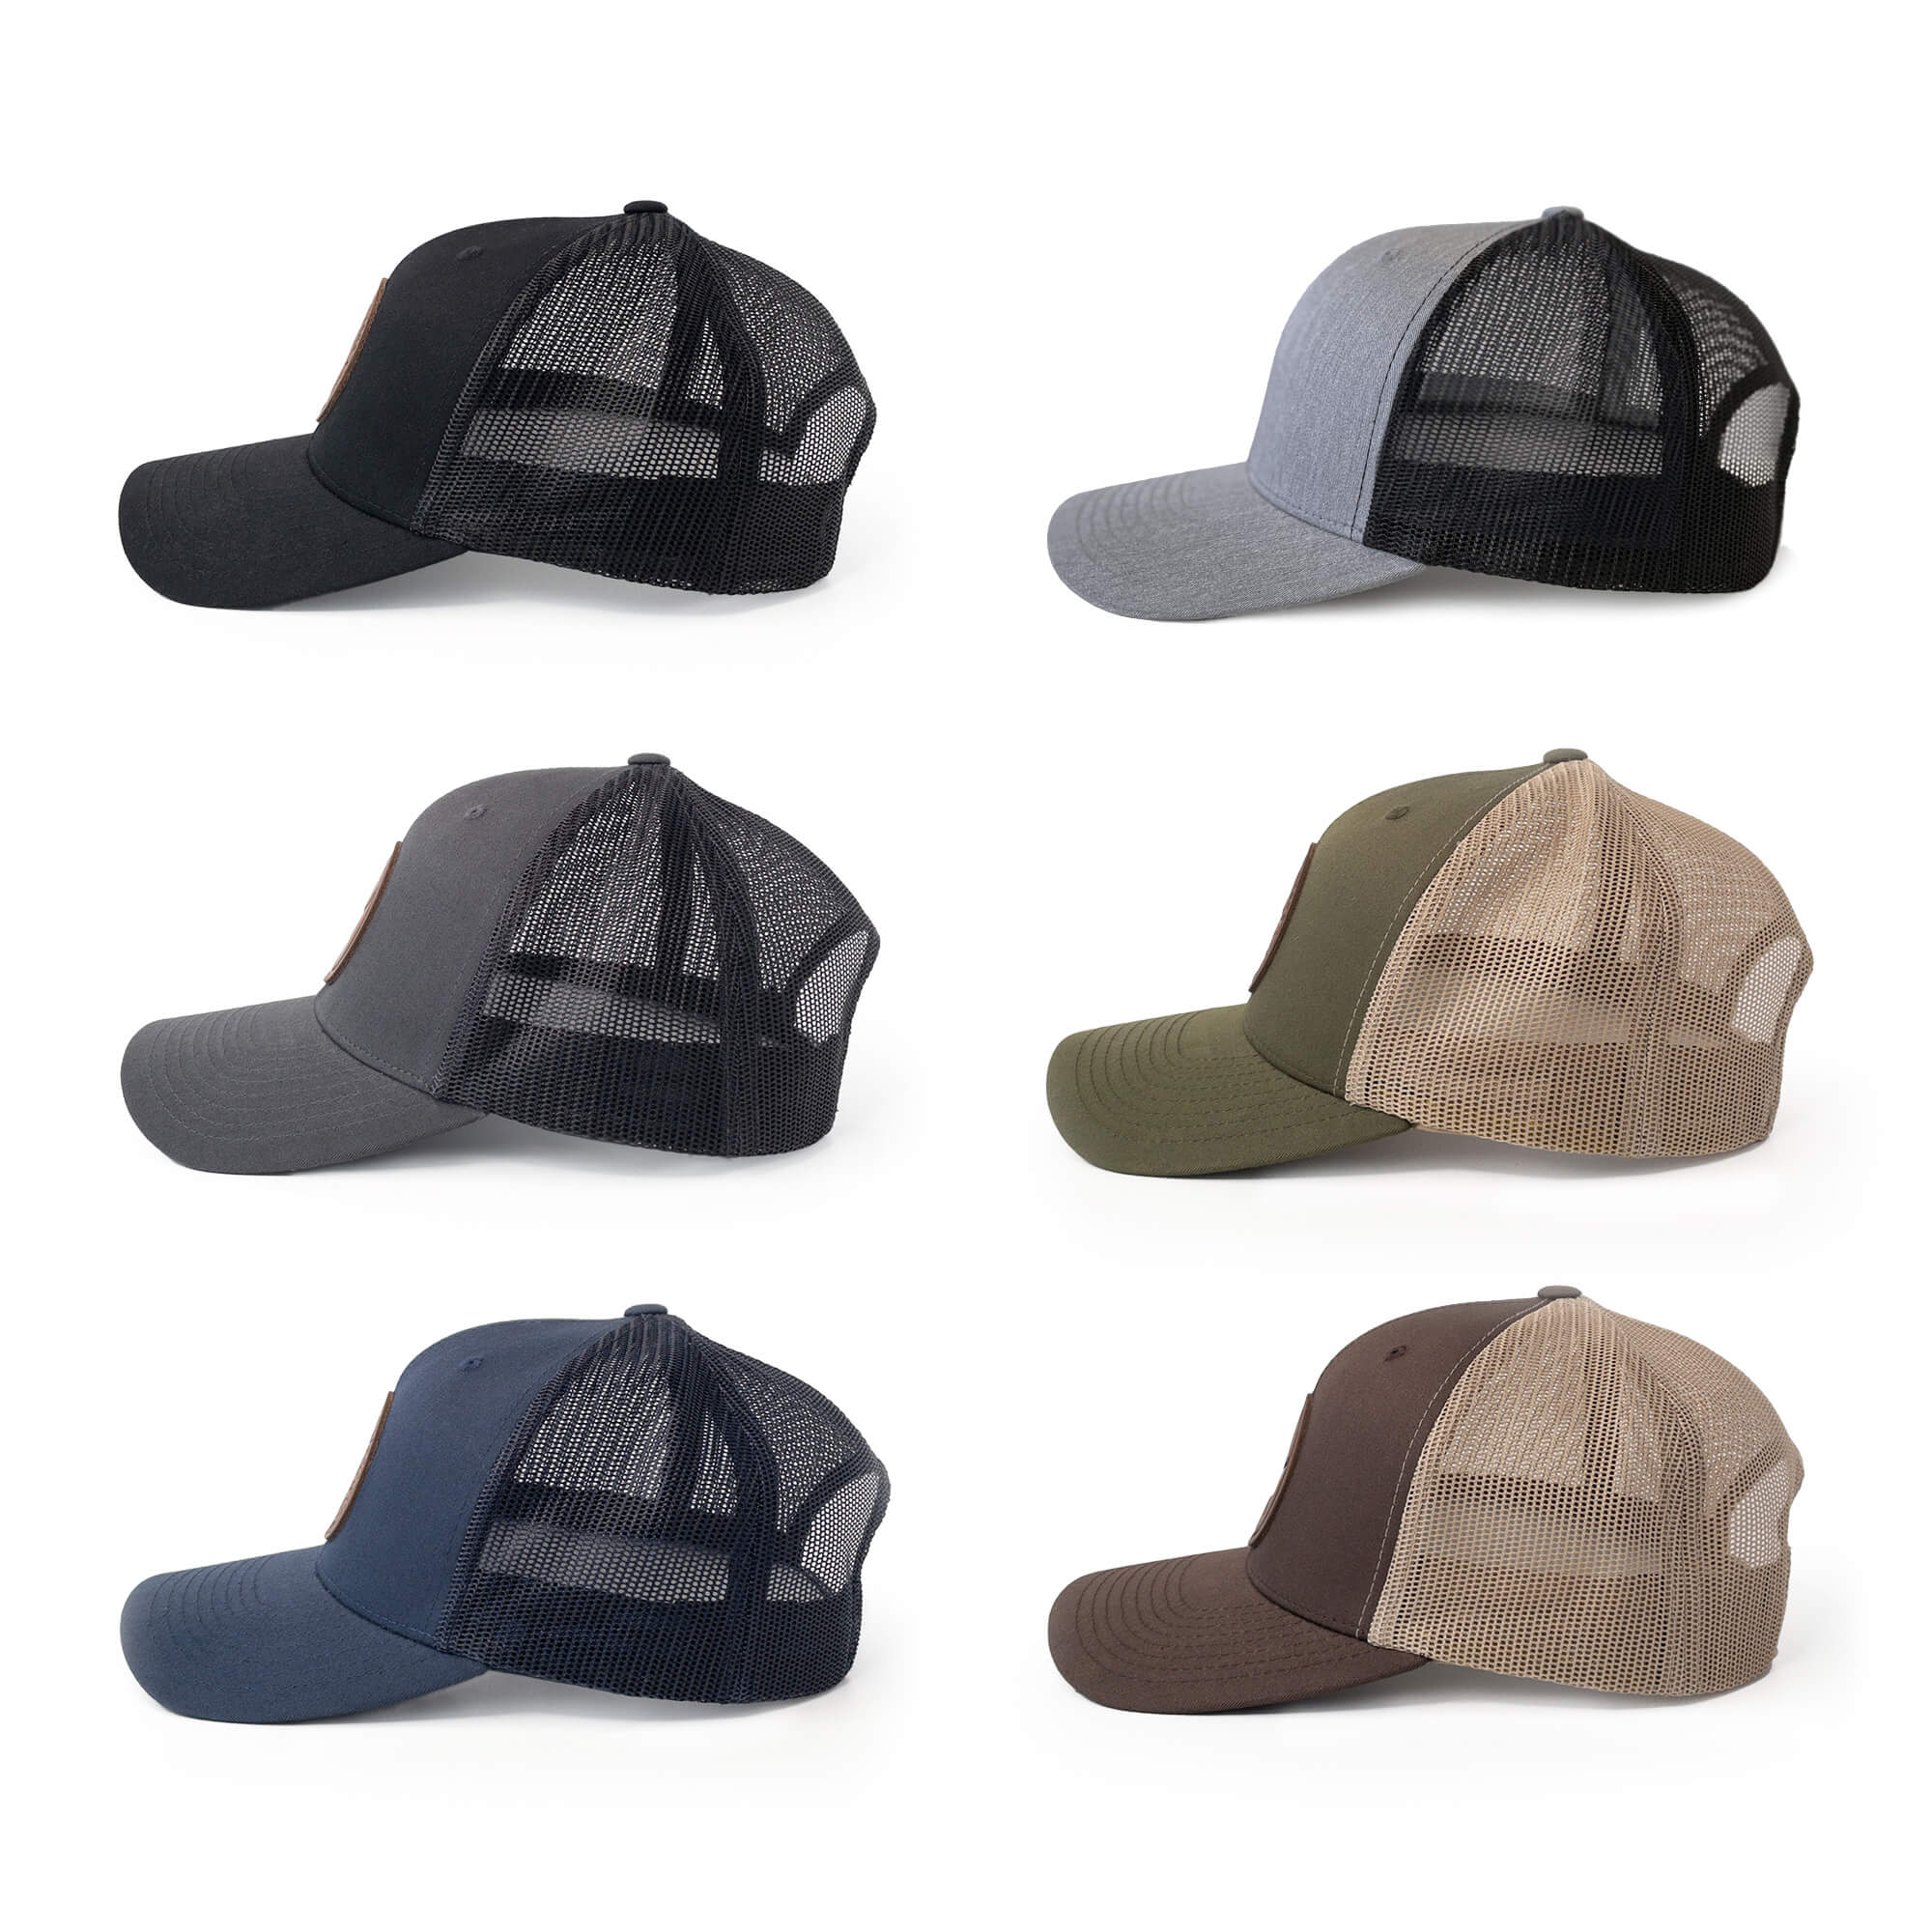 Leather patch trucker hats available in 6 colors | BLACK-003-006, CHARC-003-006, NAVY-003-006, HGREY-003-006, MOSS-003-006, BROWN-003-006